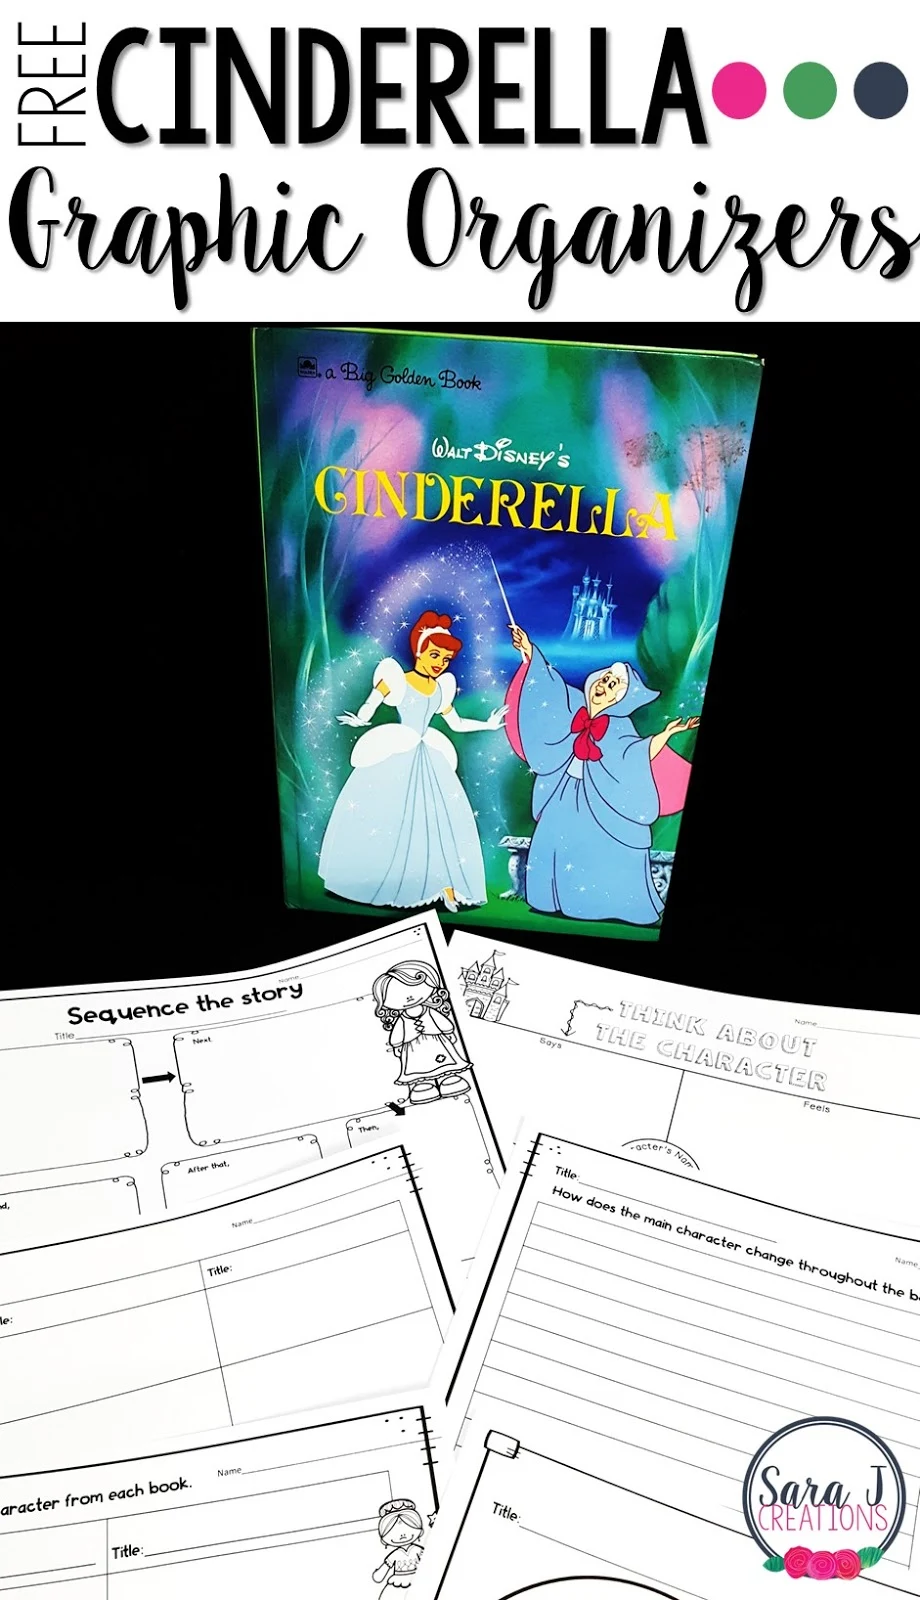 Free Cinderella graphic organizers to practice comparing and contrasting different versions of the same story.